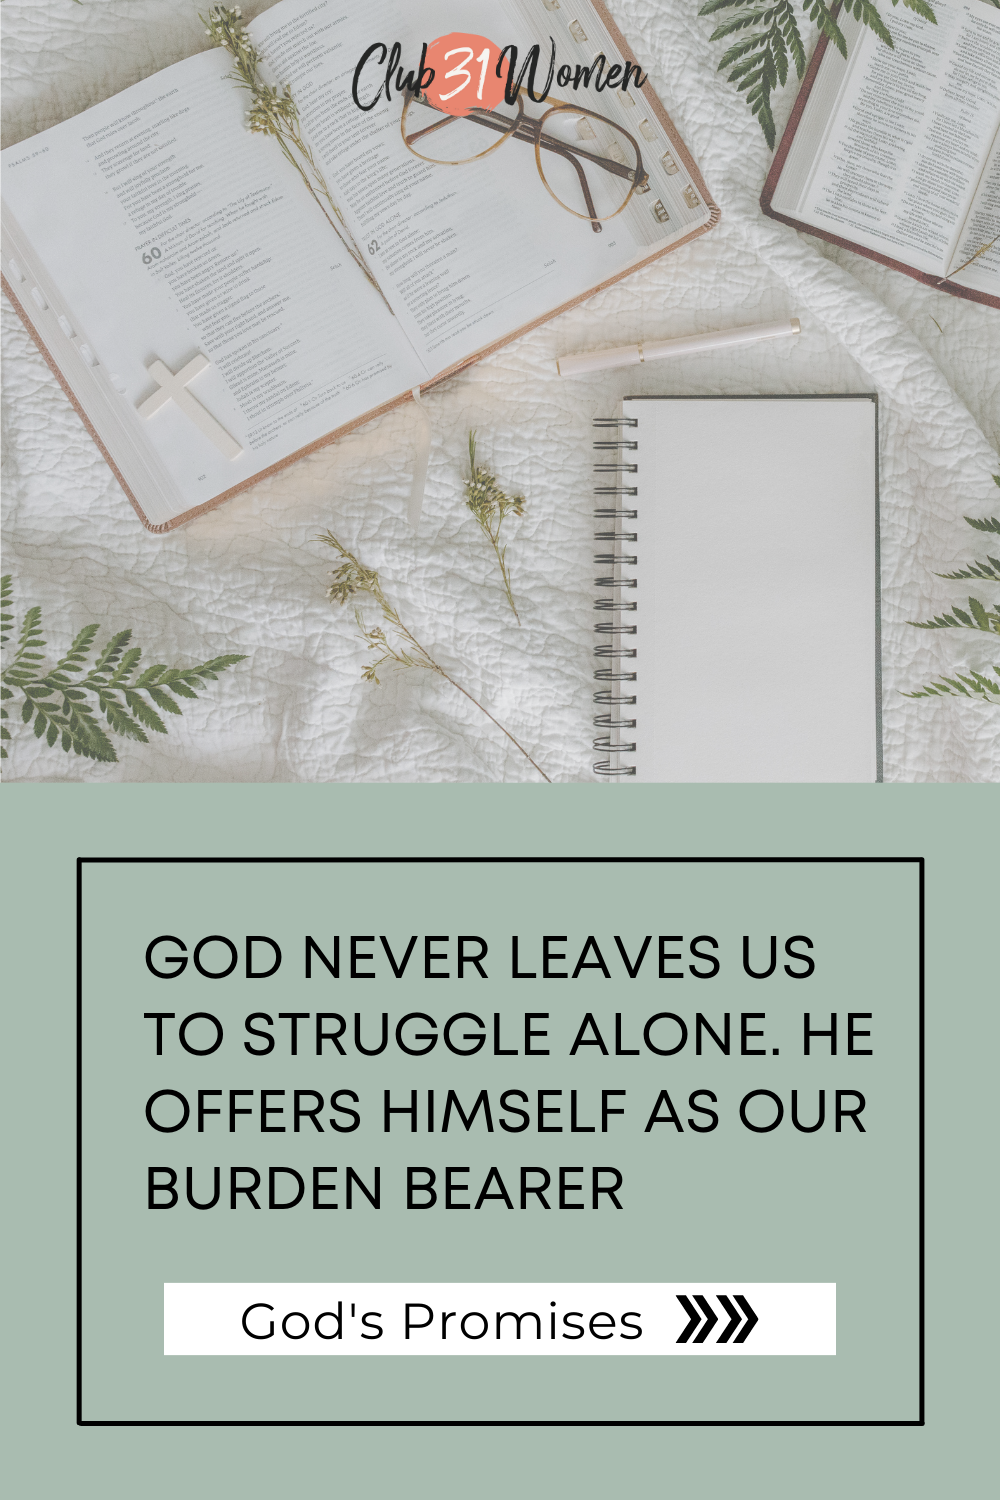 God’s Promise as Our Burden Bearer: How God Cares for Us in Our Weakness via @Club31Women